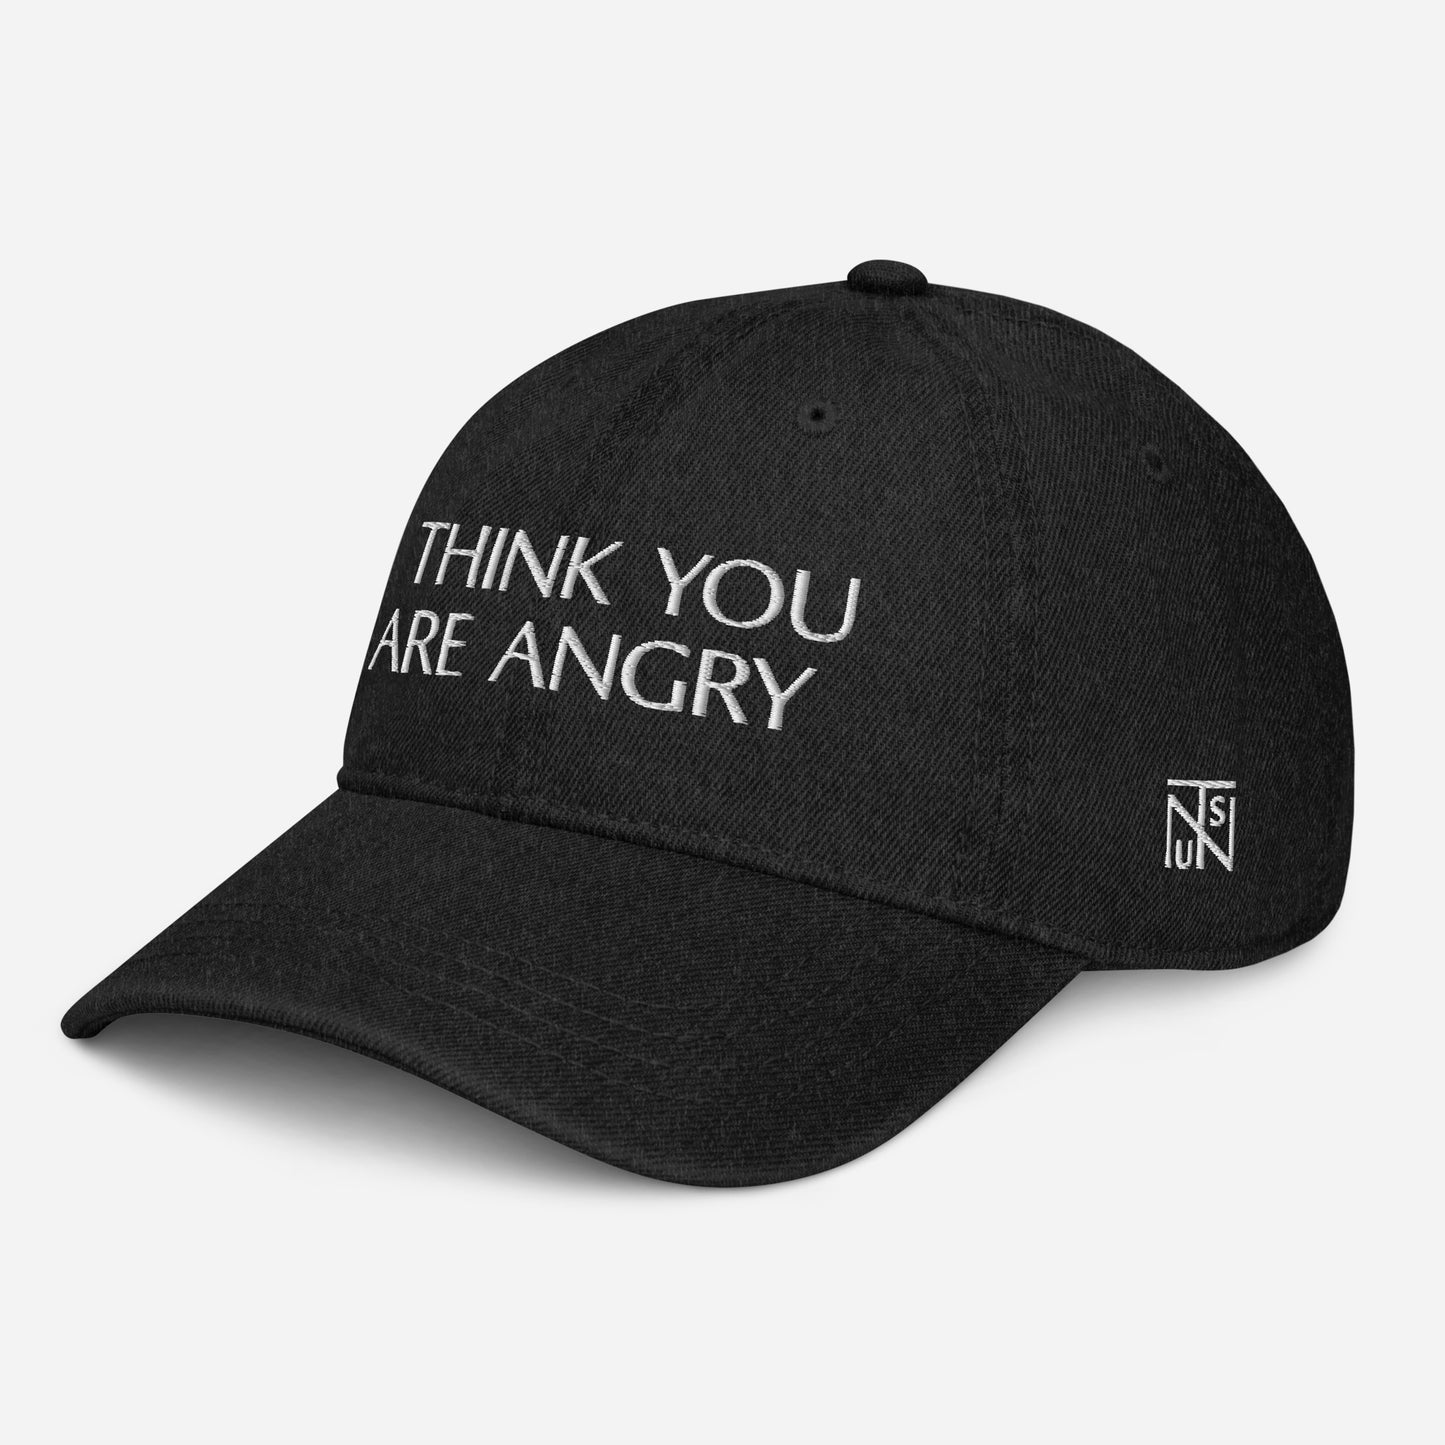 I THINK YOU ARE ANGRY HAT